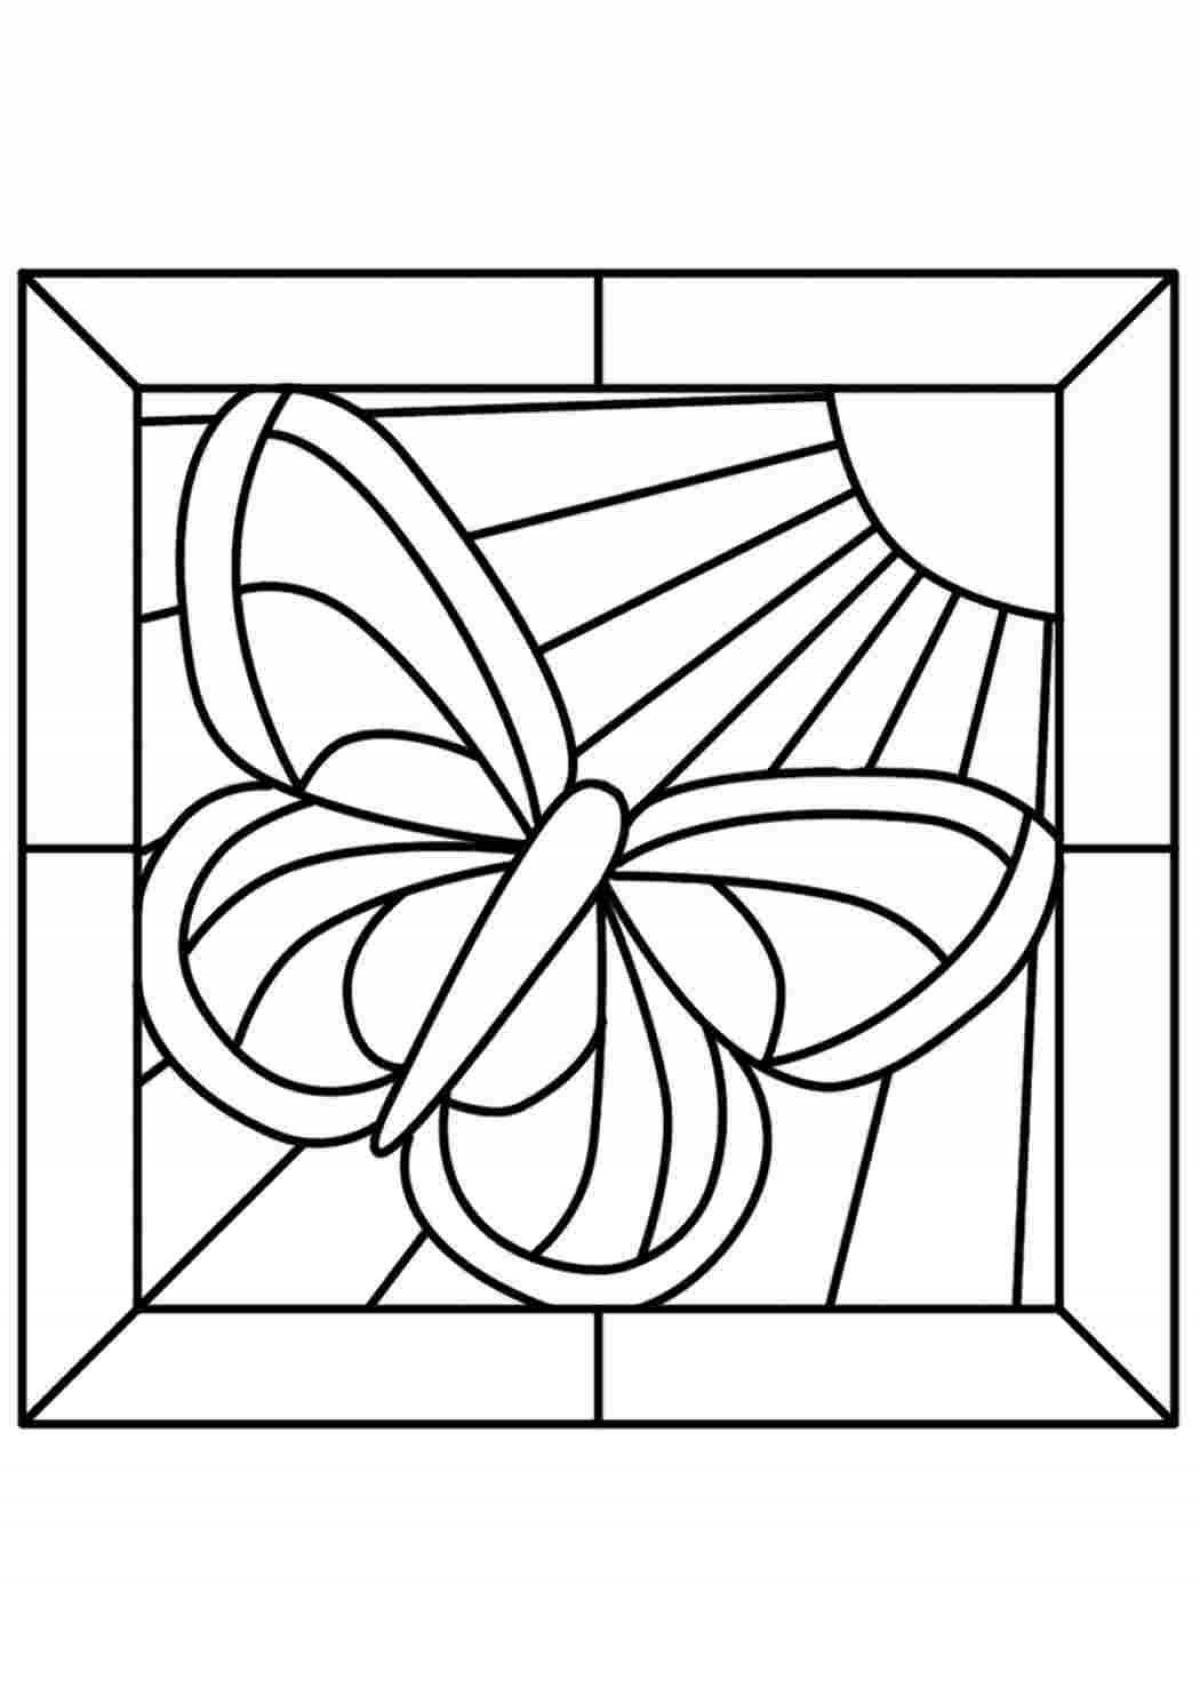 Playful stained glass coloring page